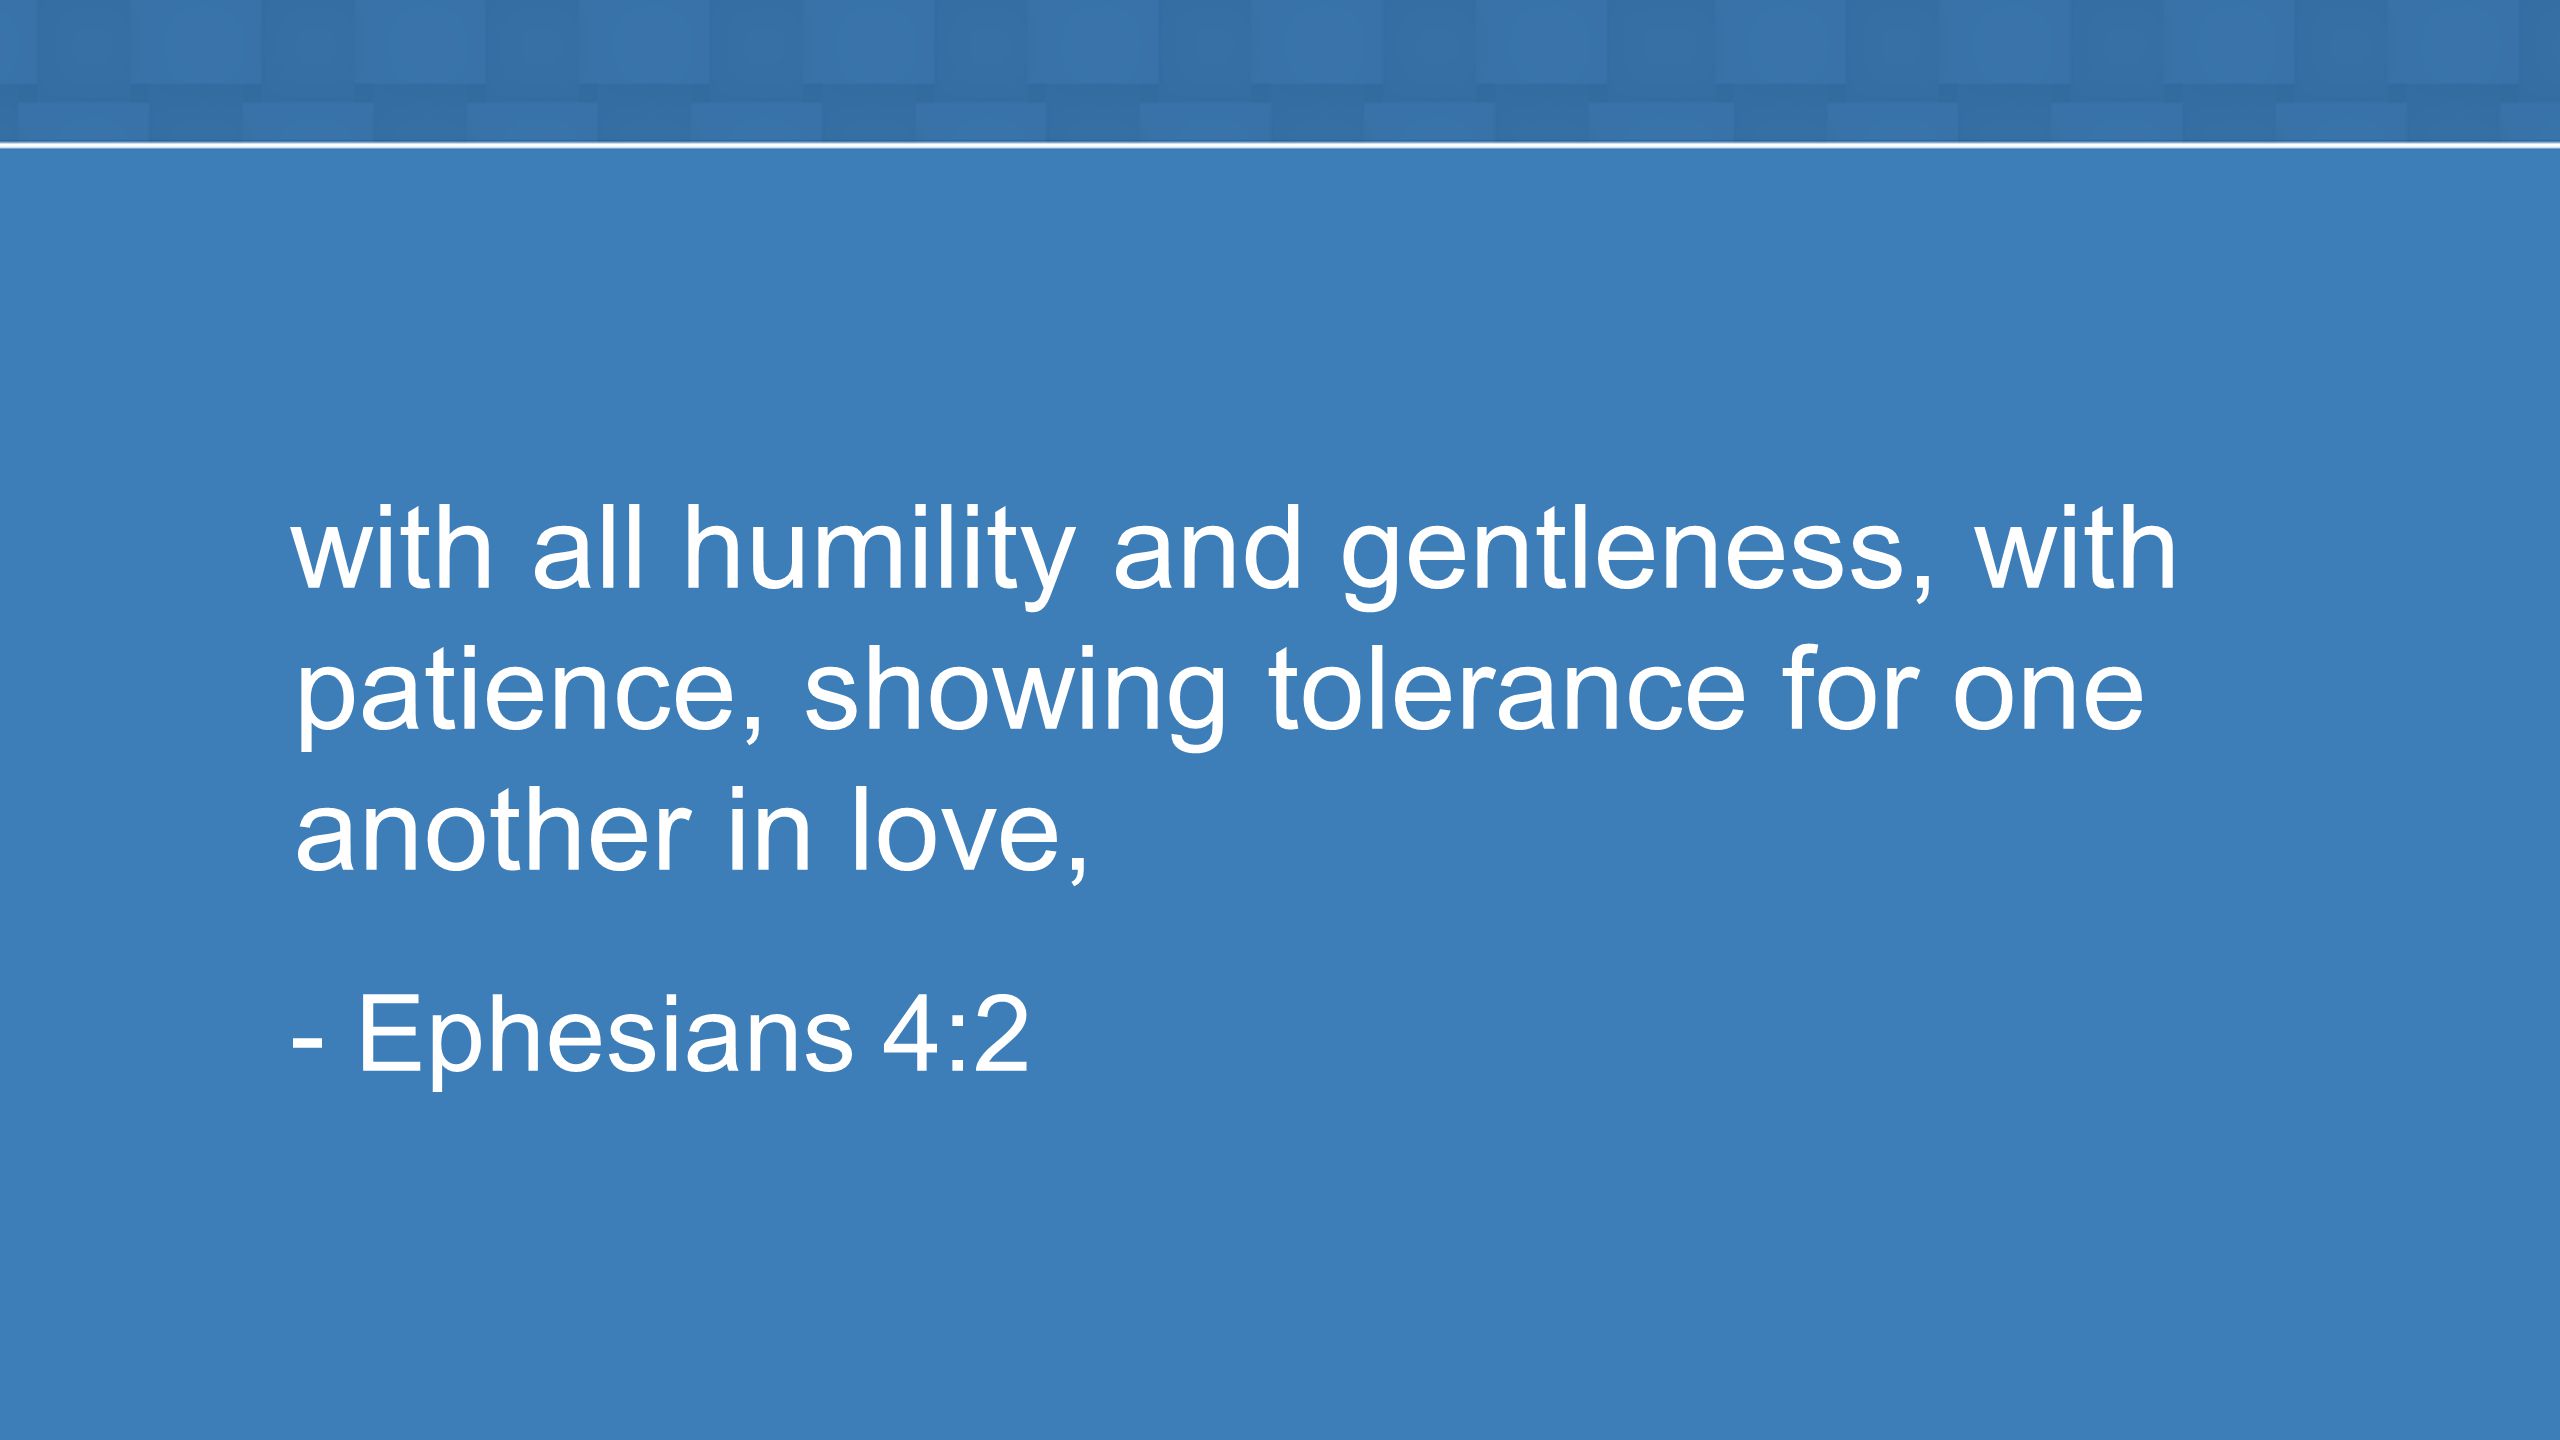 with all humility and gentleness, with patience, showing tolerance for one another in love, - Ephesians 4:2